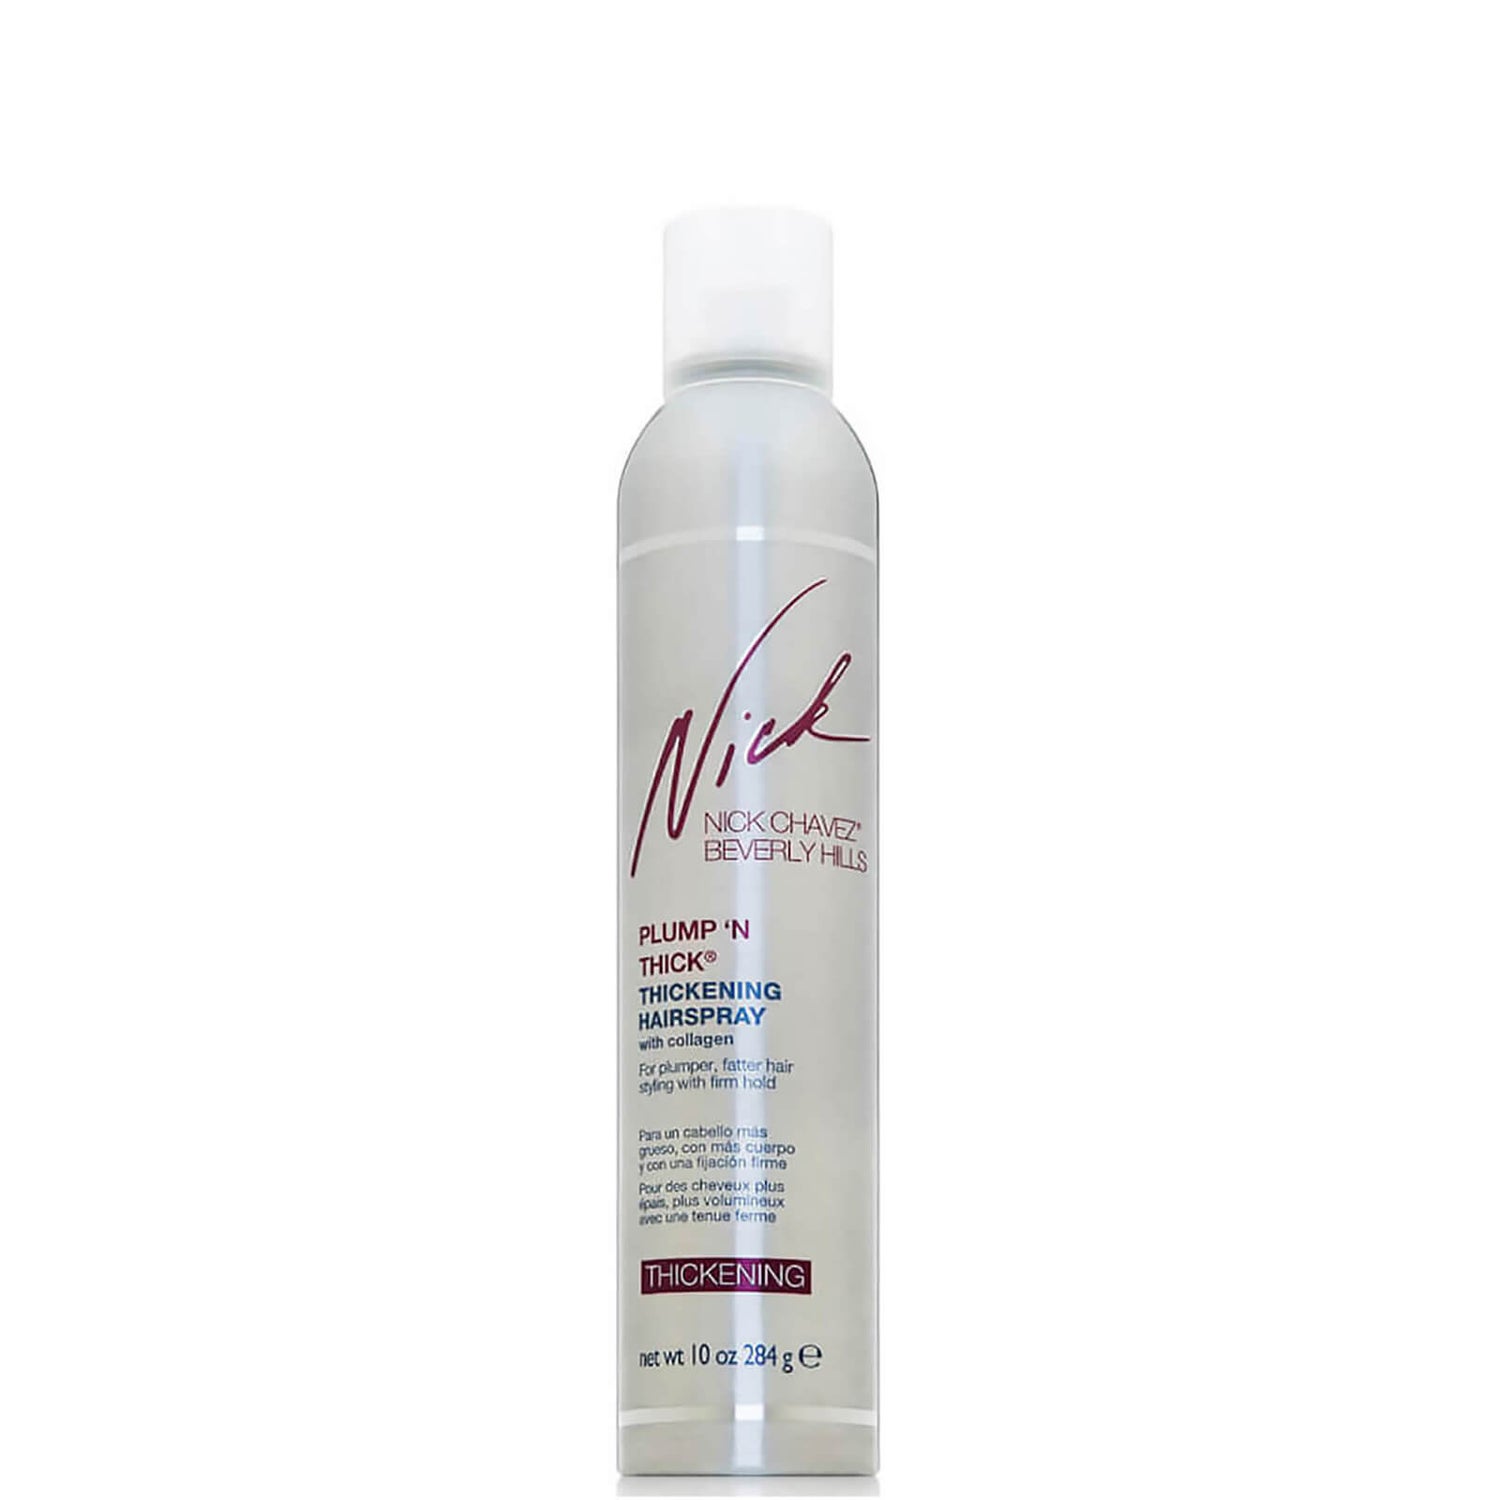 Nick Chavez Beverly Hills Plump 'N Thick Thickening Hairspray (10 oz.)